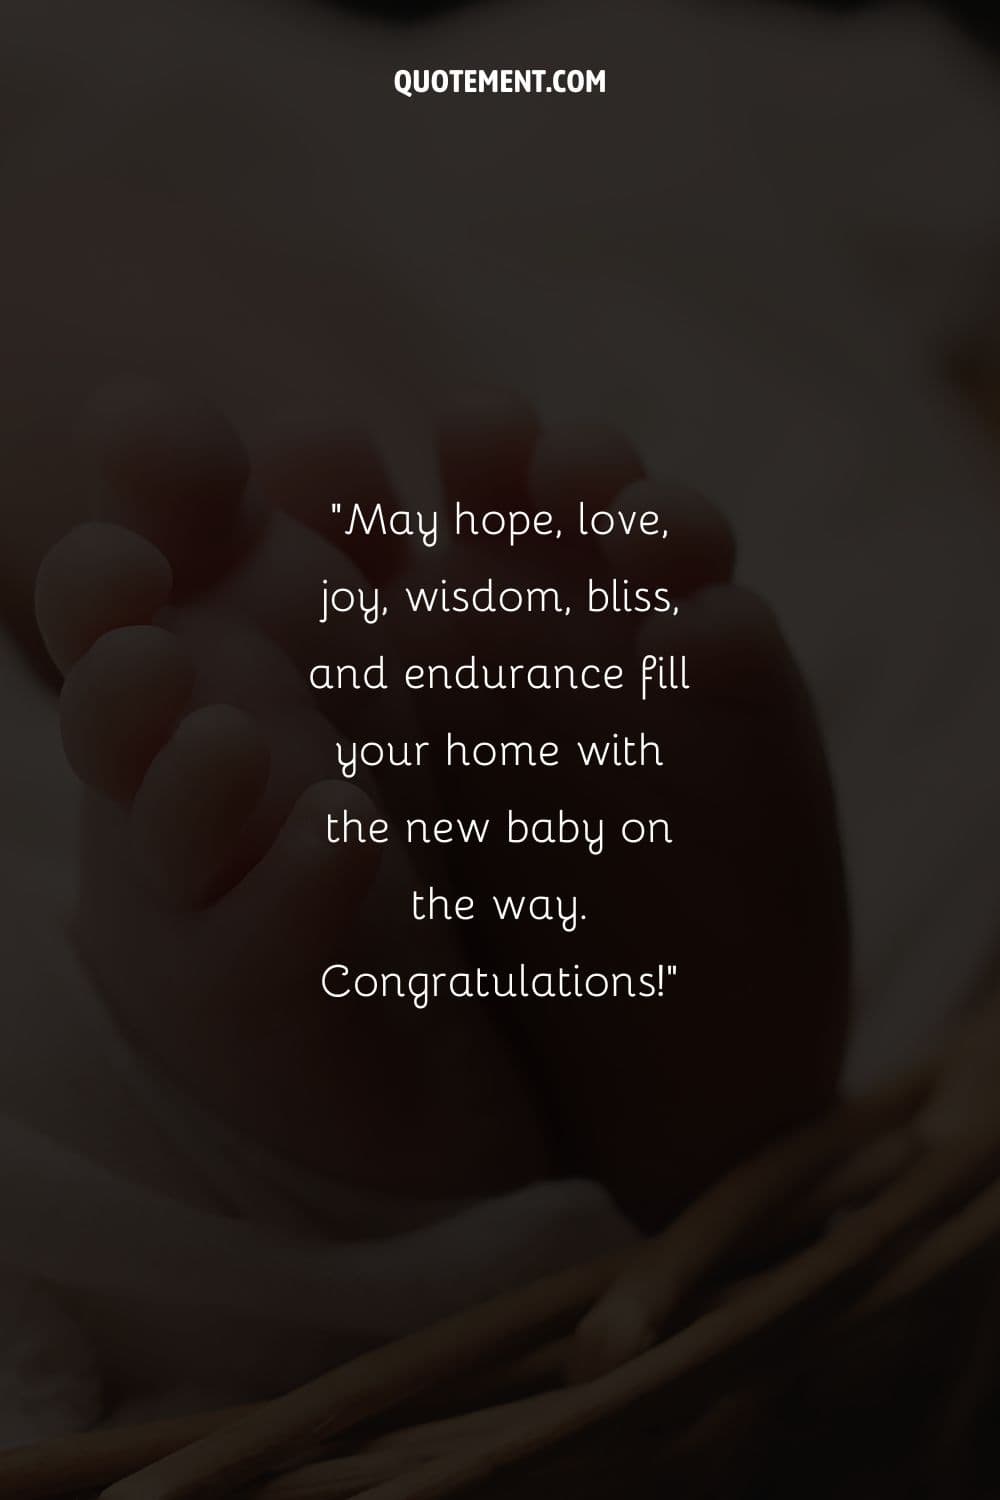 May hope, love, joy, wisdom, bliss, and endurance fill your home with the new baby on the way